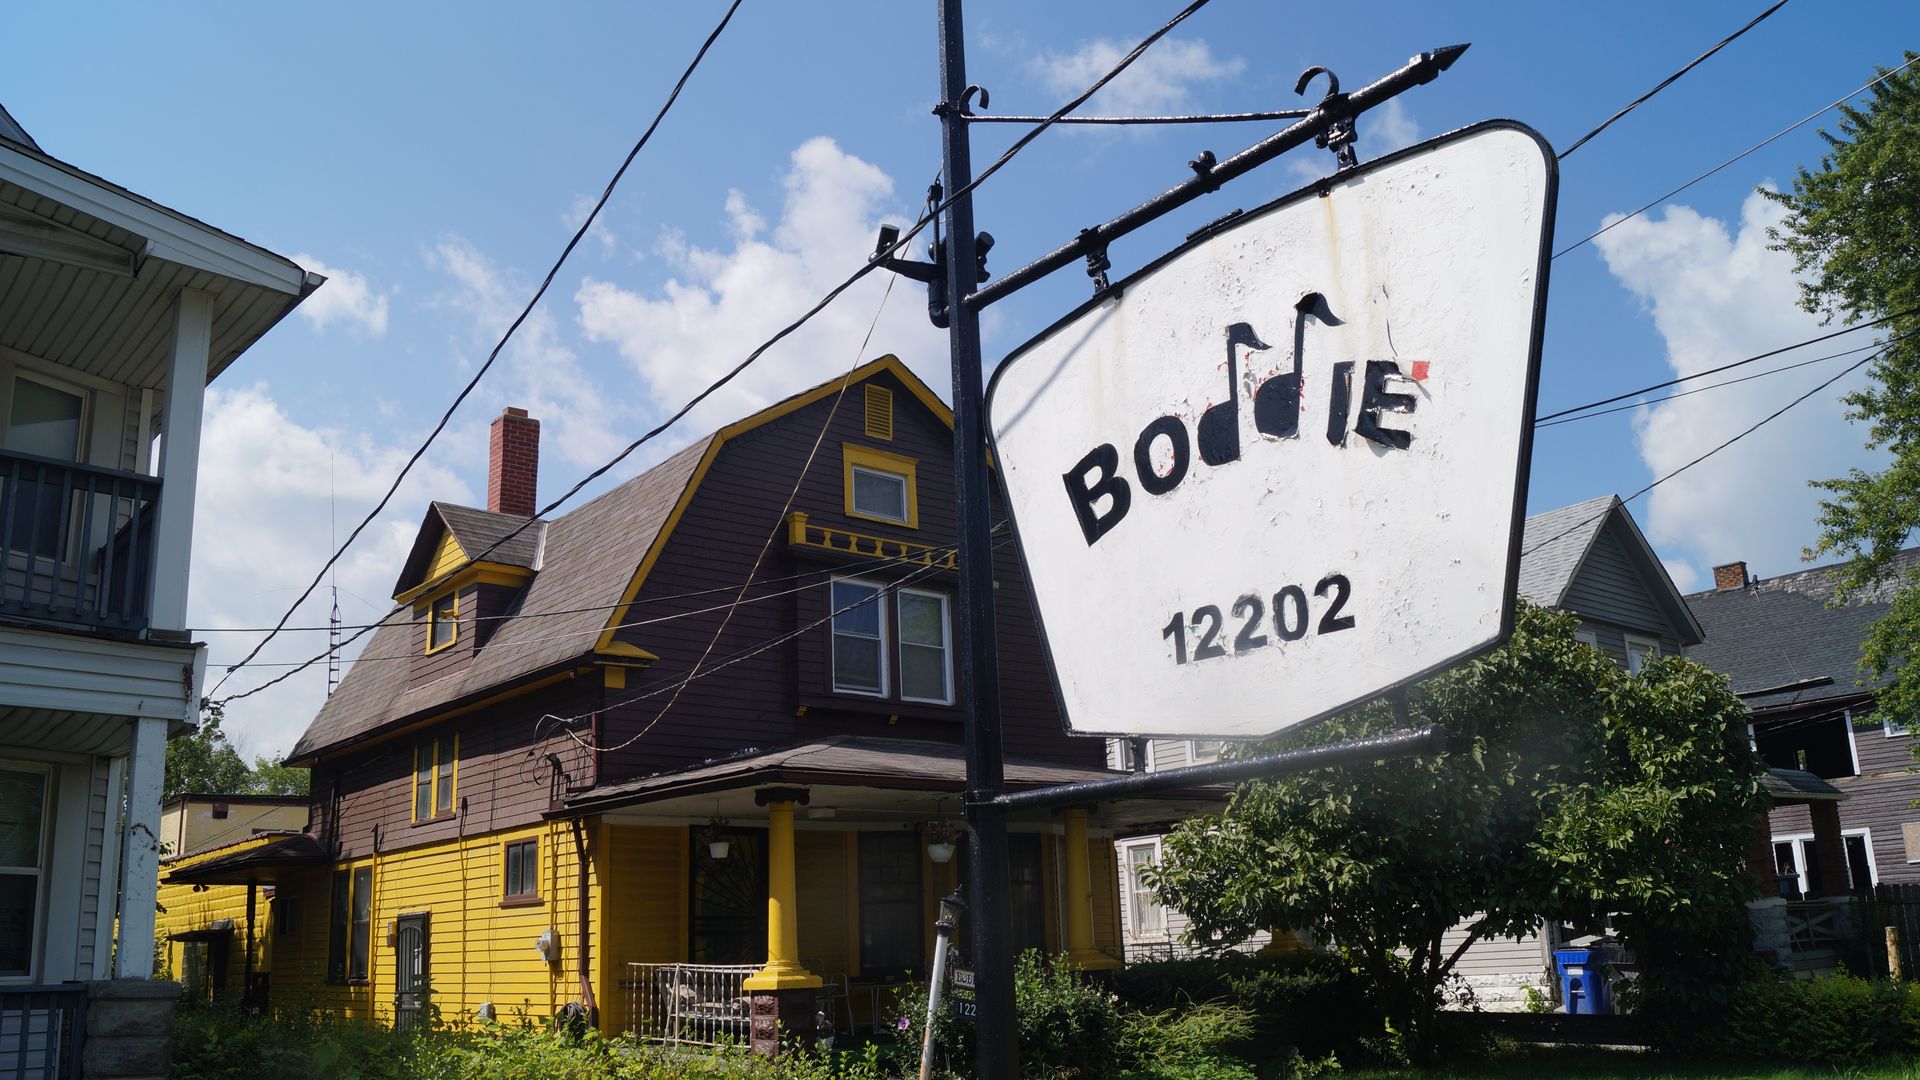 A white hanging sign reading "Boddie, 12202" in front of a brown and yellow house. 